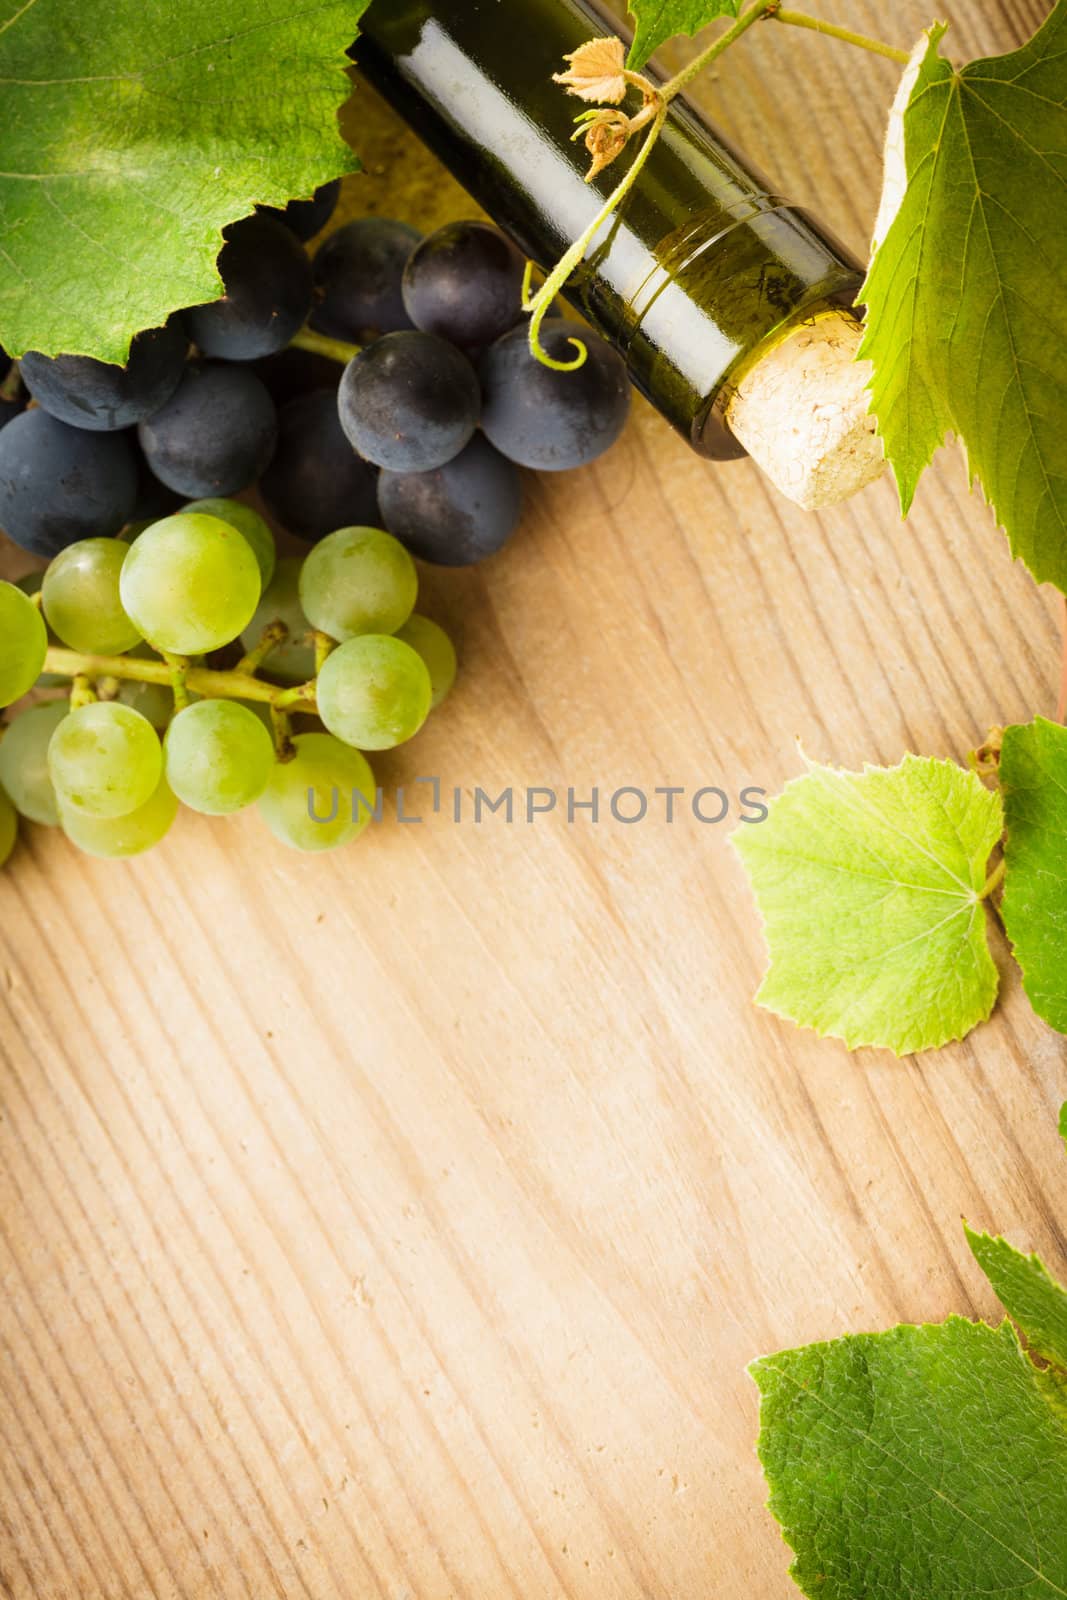 bottle of wine with leaves and grapes on wooden table